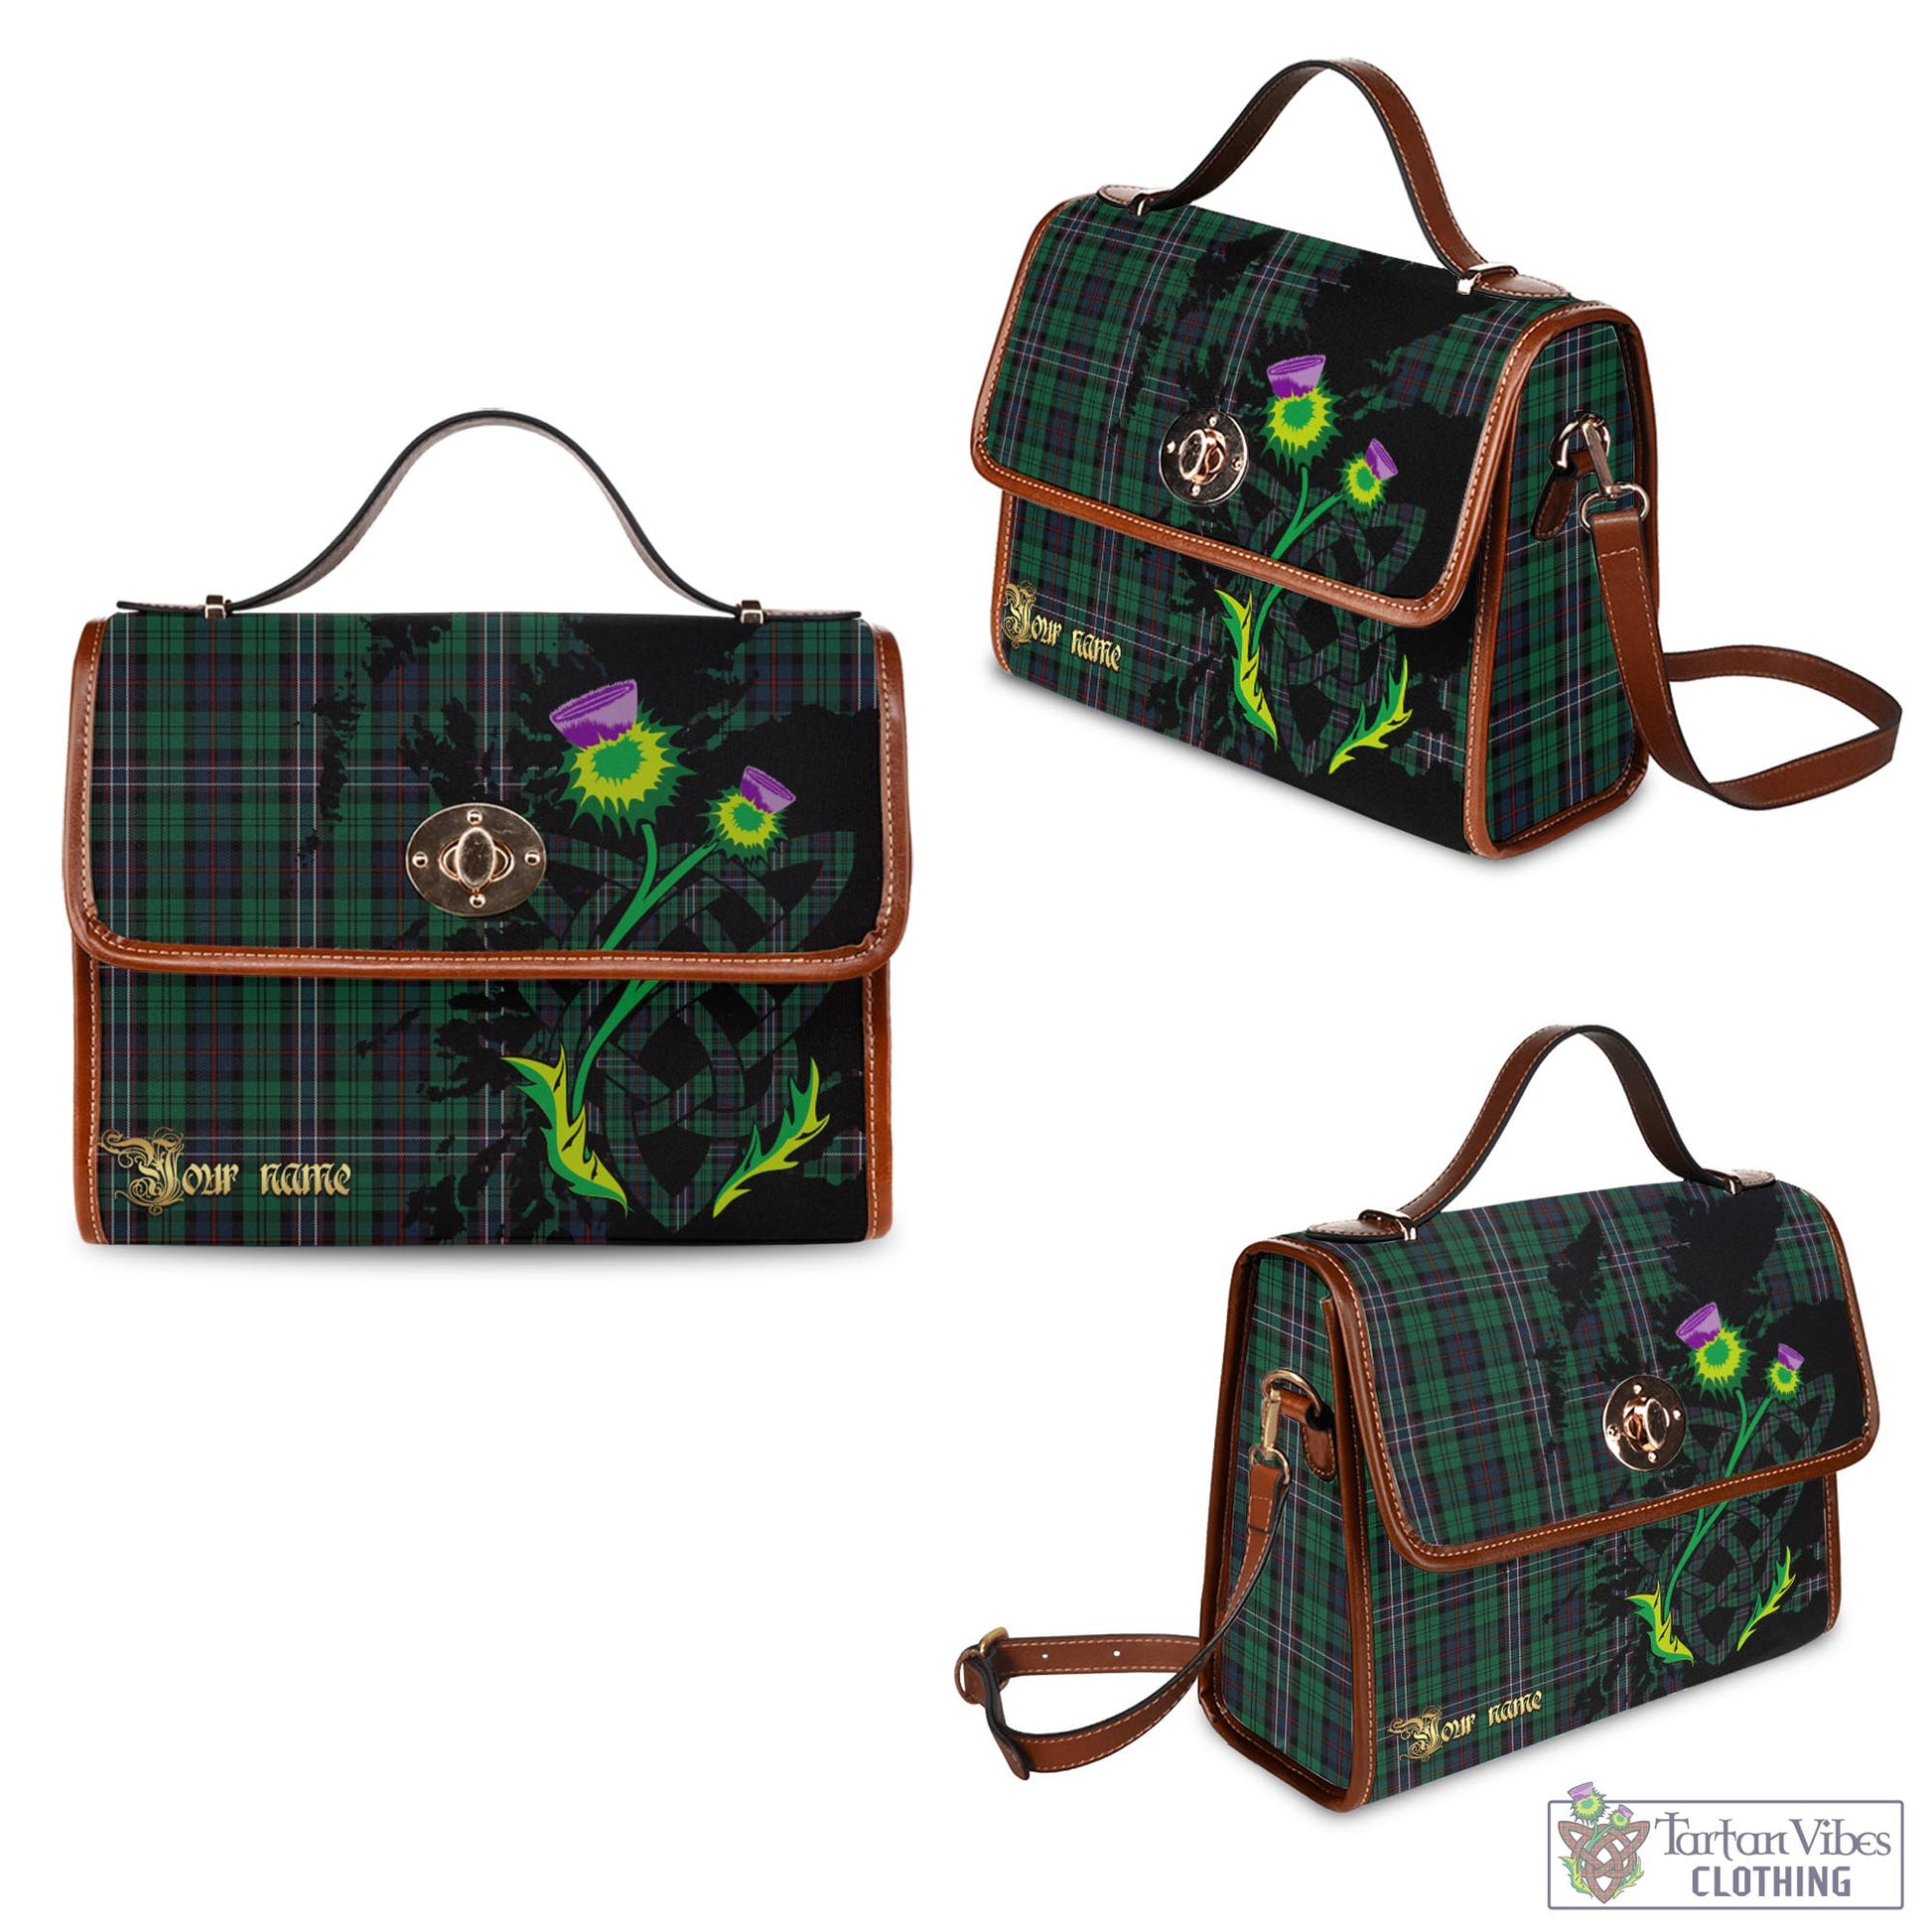 Tartan Vibes Clothing Scotland National Tartan Waterproof Canvas Bag with Scotland Map and Thistle Celtic Accents